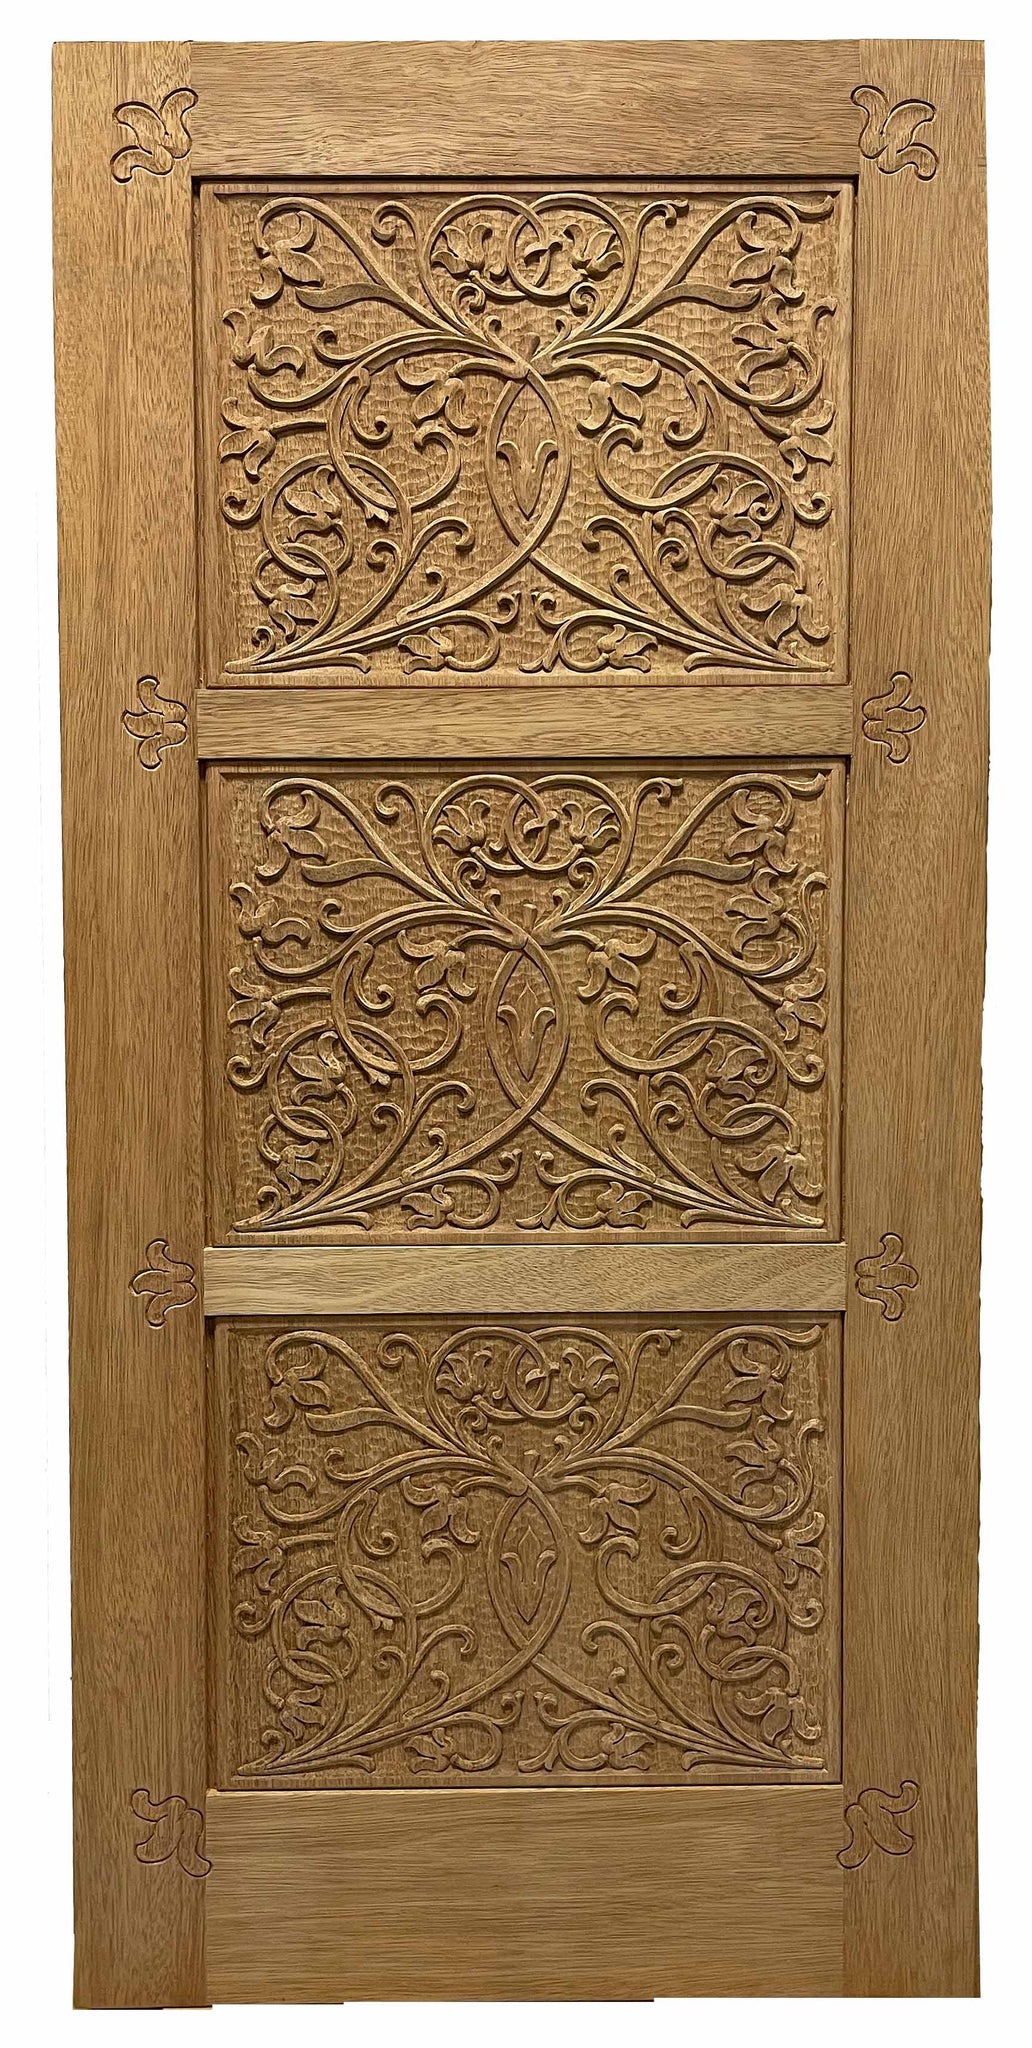 3 ft. x 6 ft. 8 in. Unfinished Mahogany Wood 3 Panel Exterior Door with Decretive carvings